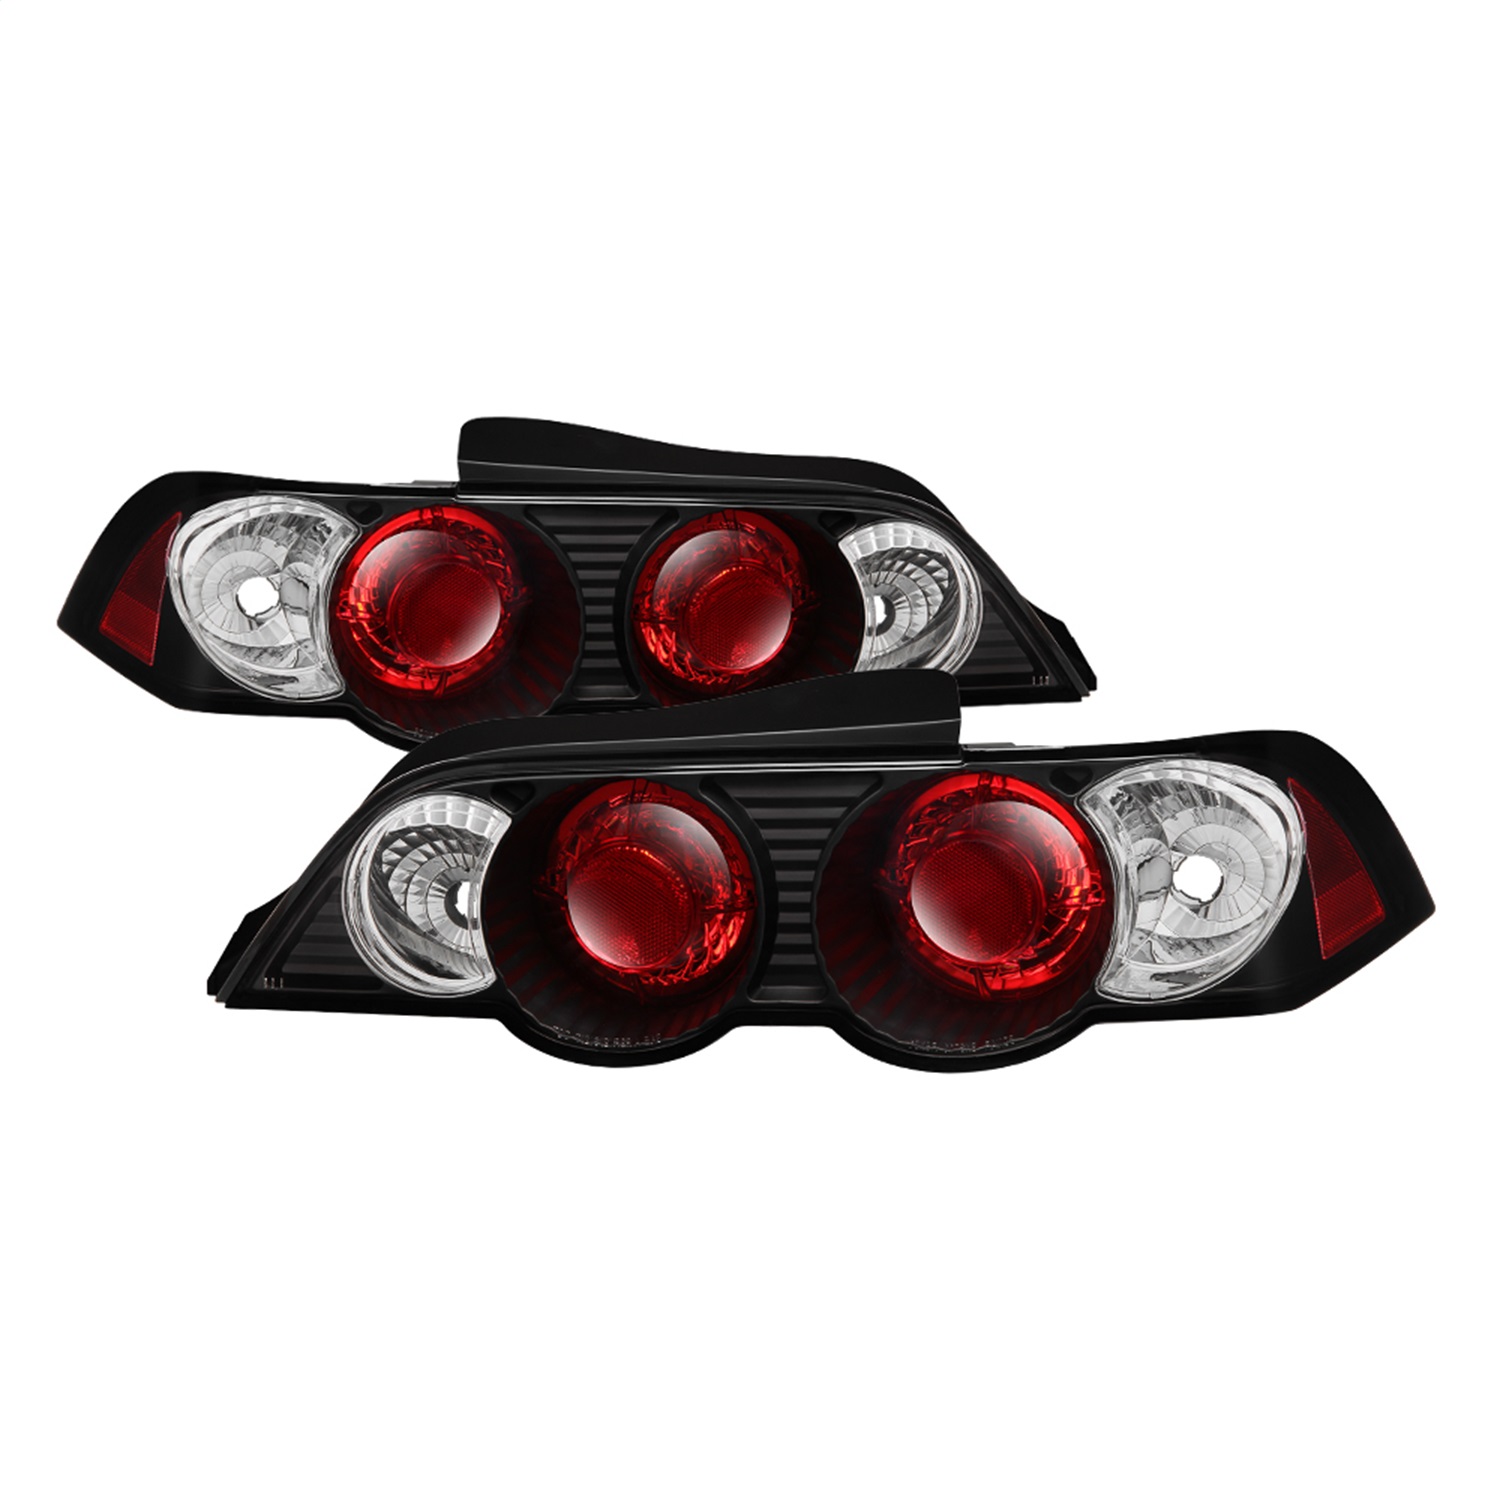 Spyder Auto 5000330 Euro Style Tail Lights Fits 02-04 RSX